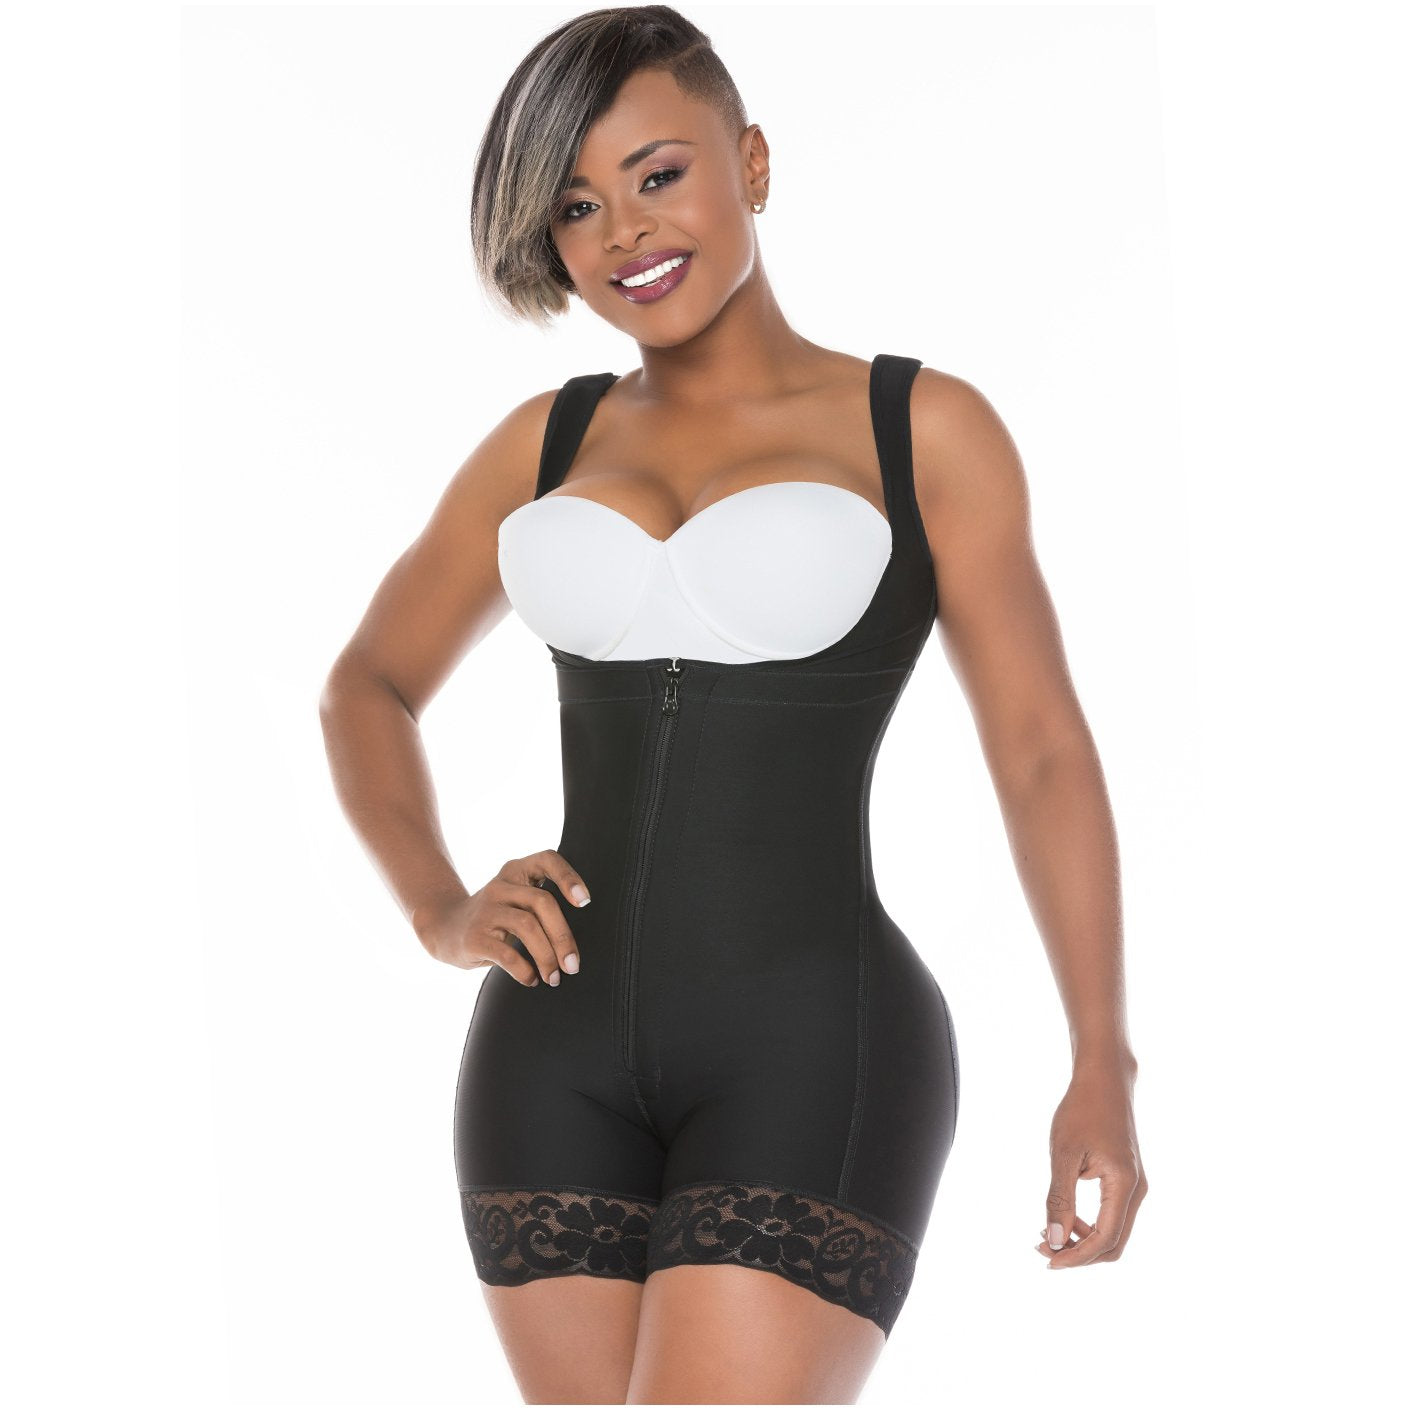 Fajas MariaE 9262 Full Body Body Shaper for Women to the Knee with